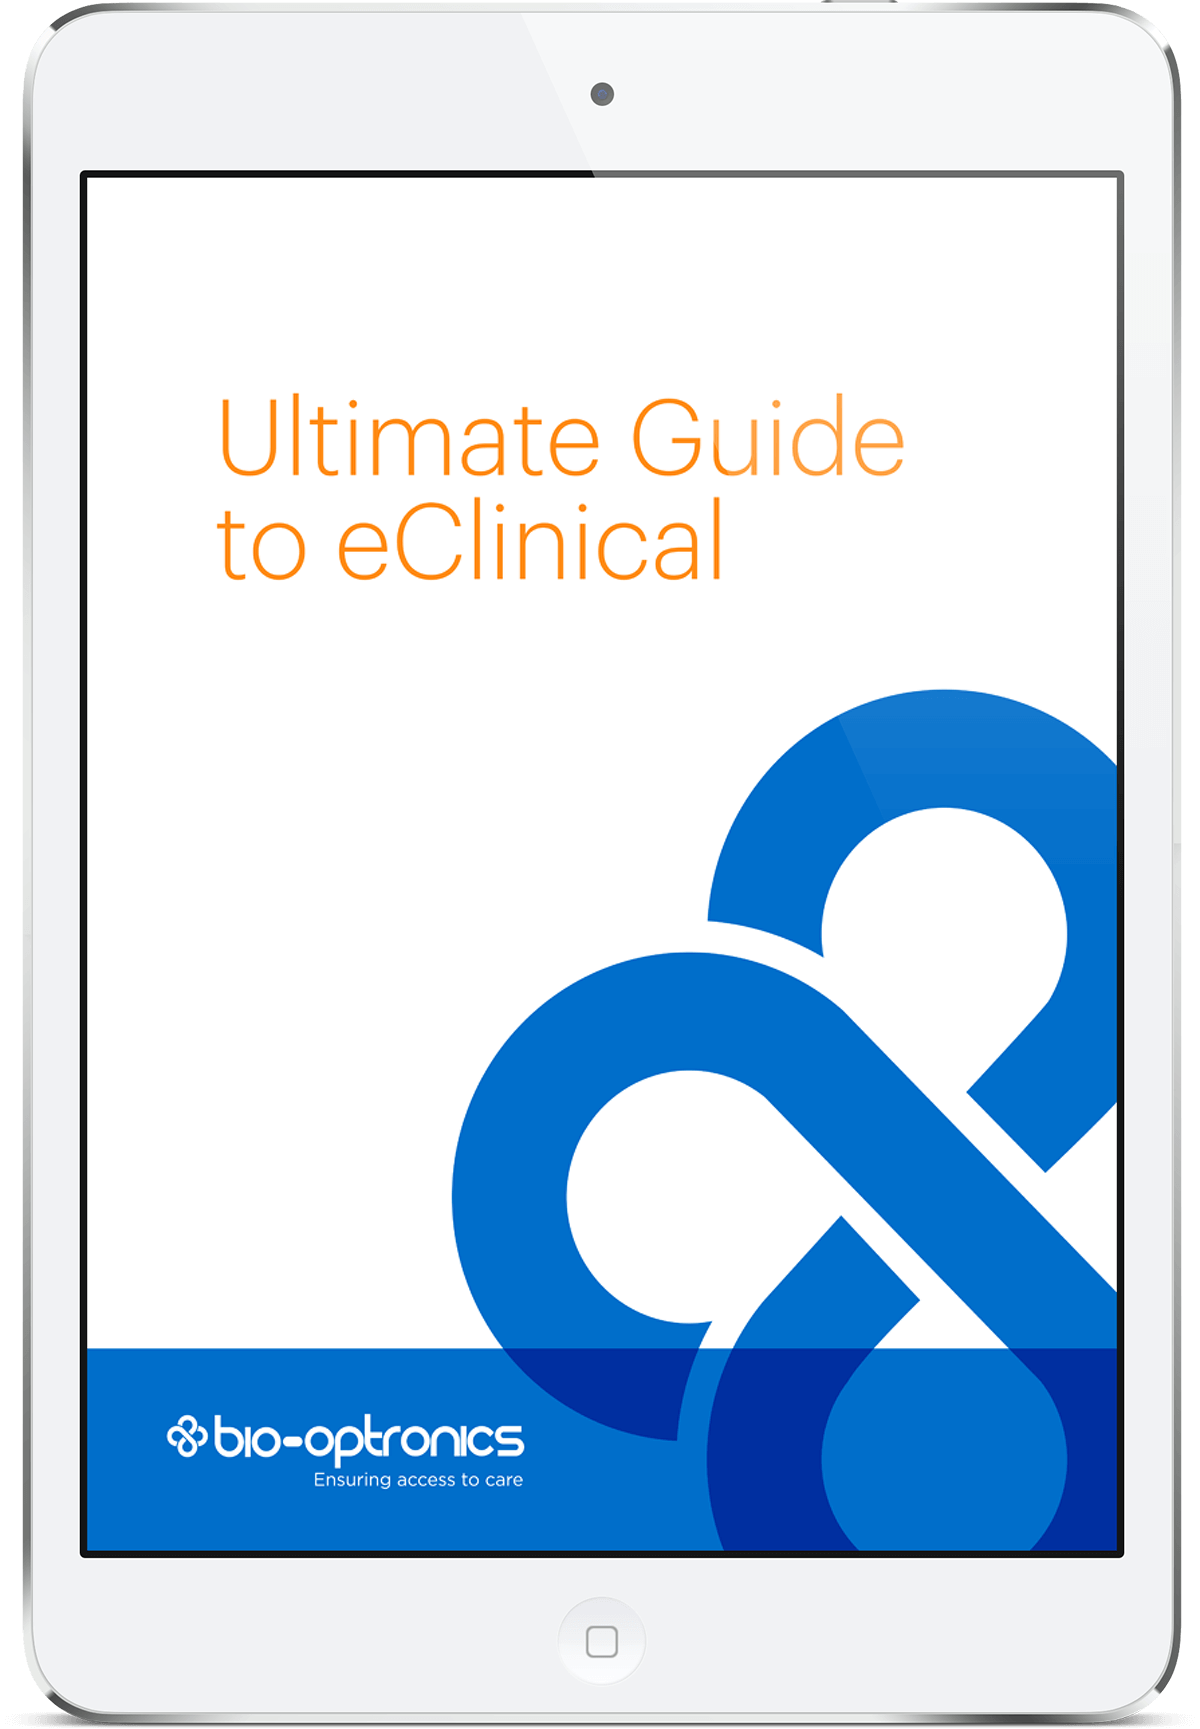 The Ultimate Guide to eClinical